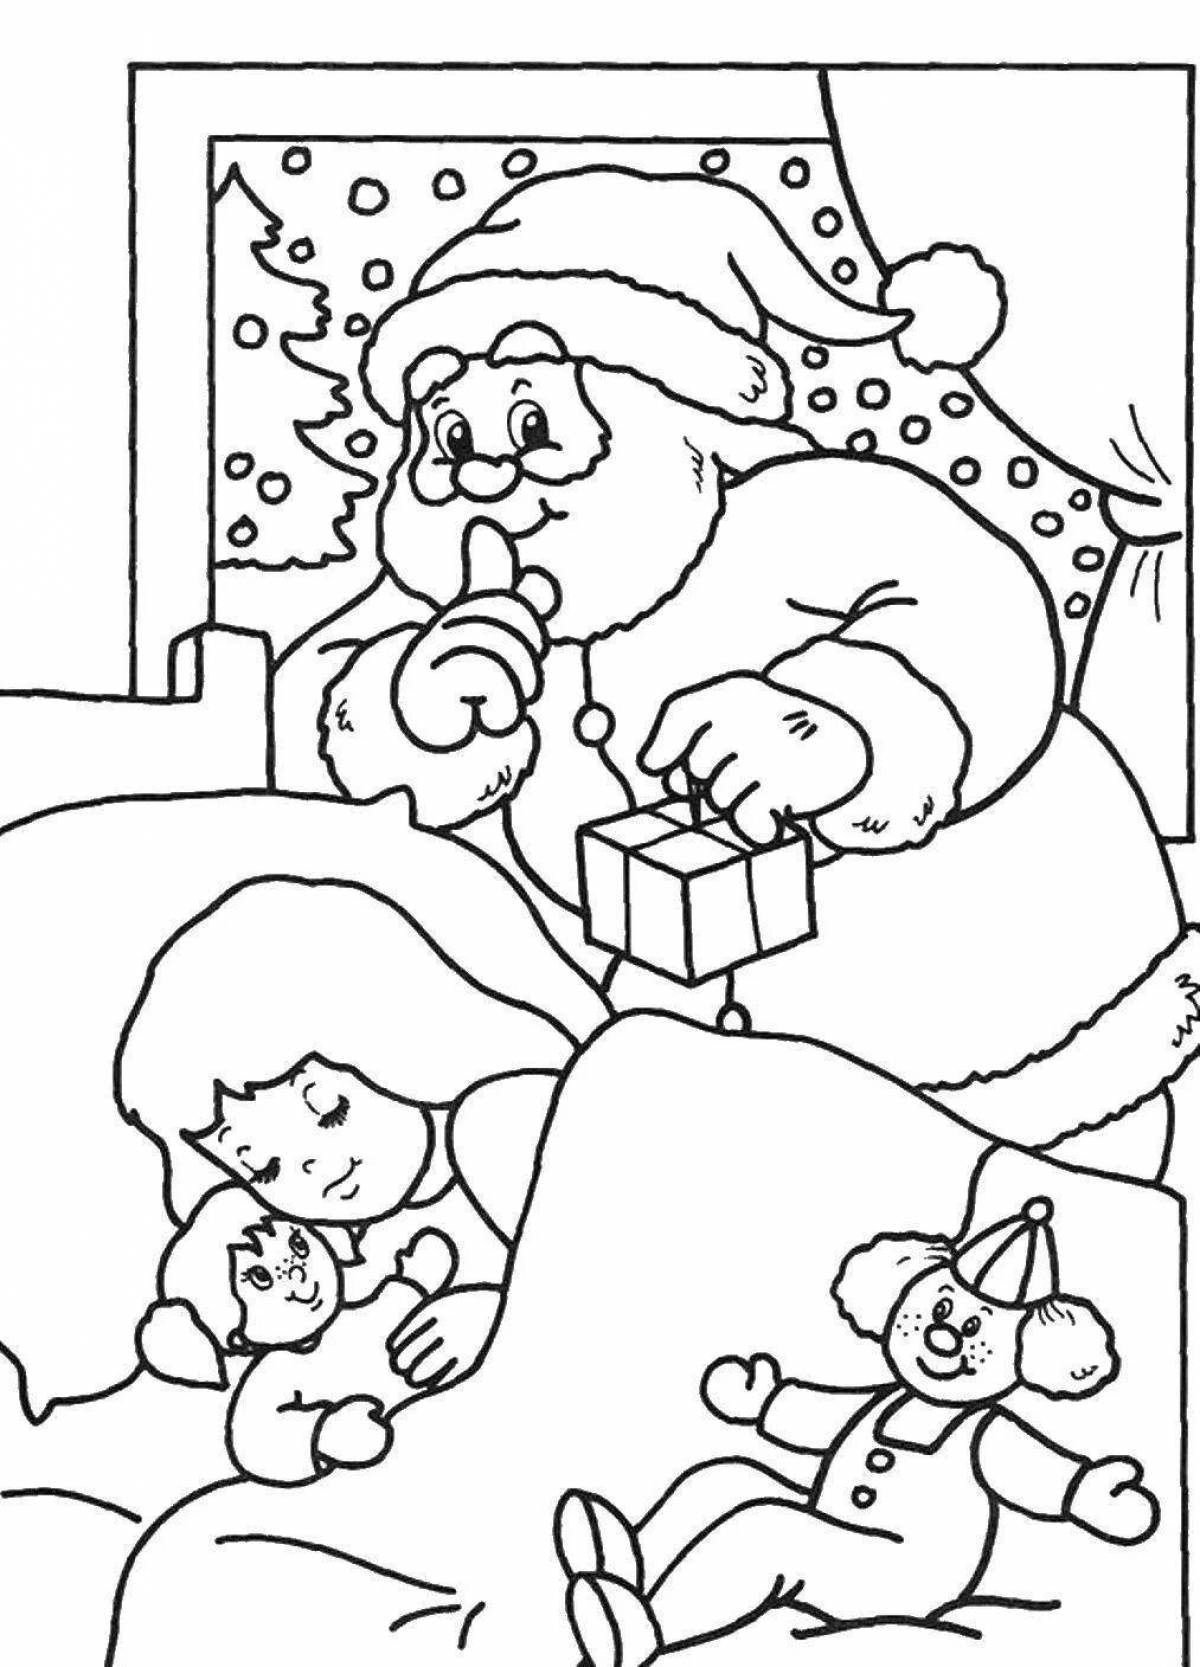 Brilliant Christmas story coloring book